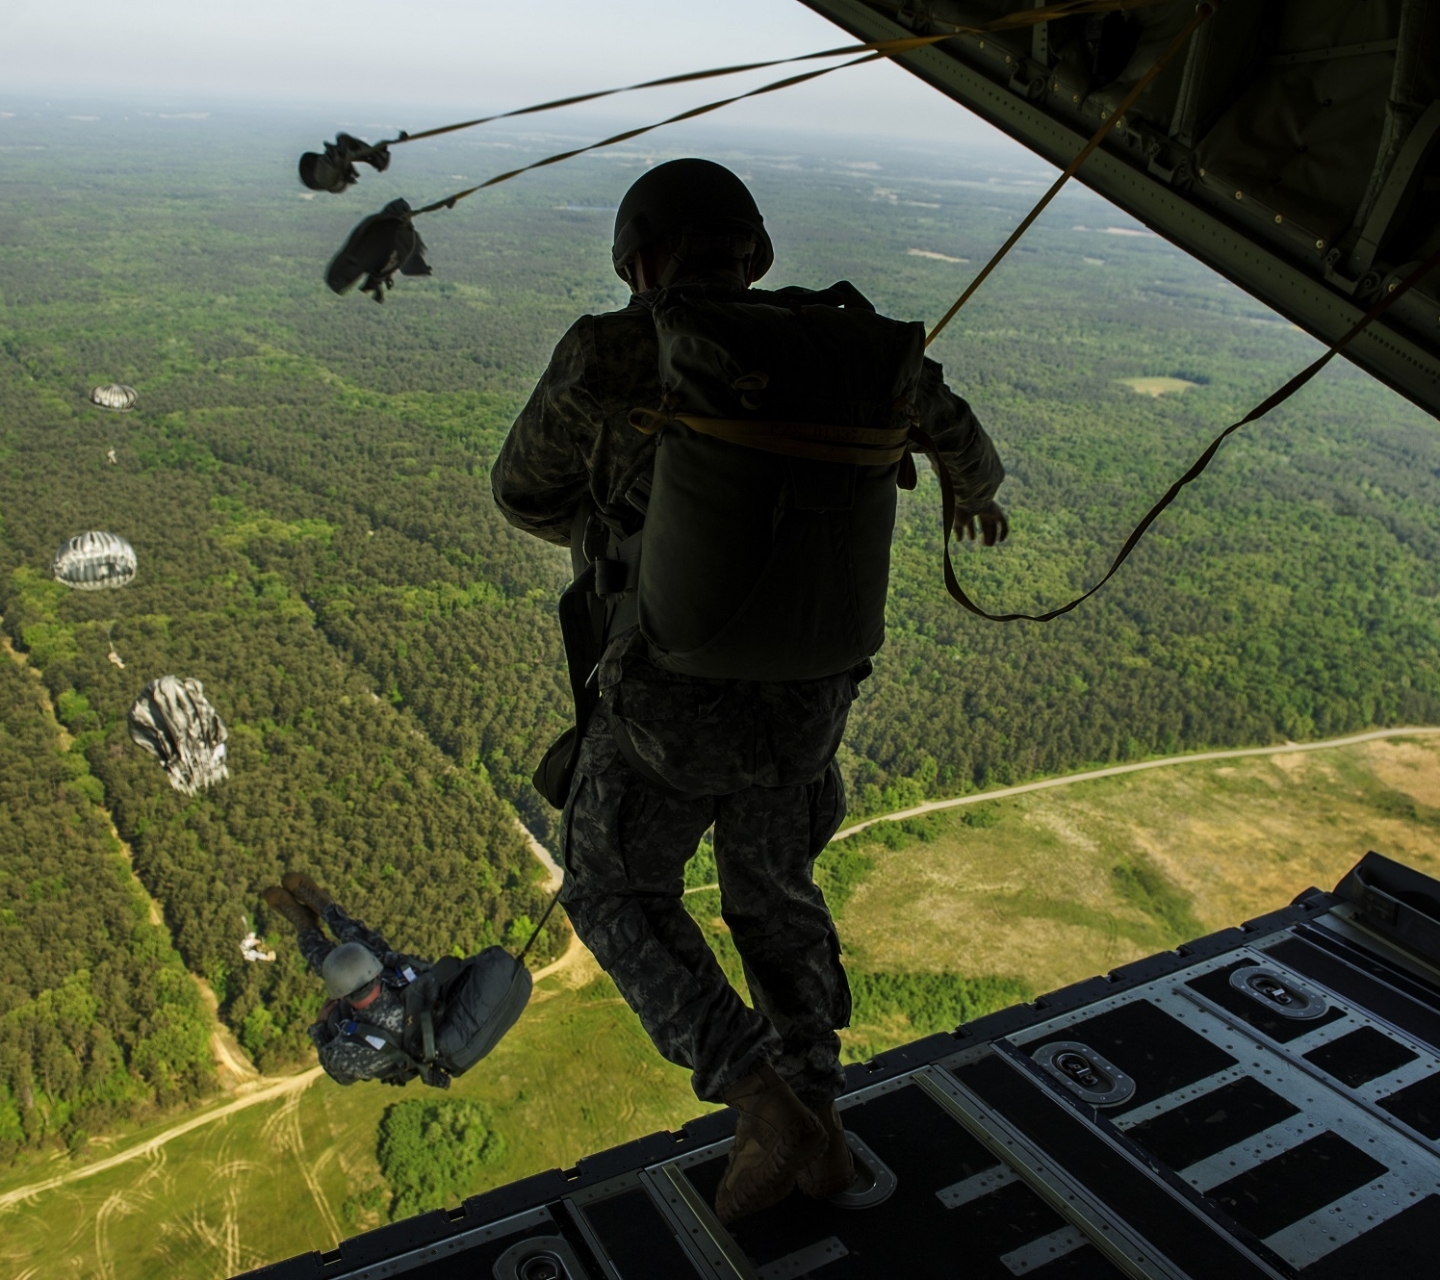 paratrooper, military, parachuting, aircraft, soldier, air force